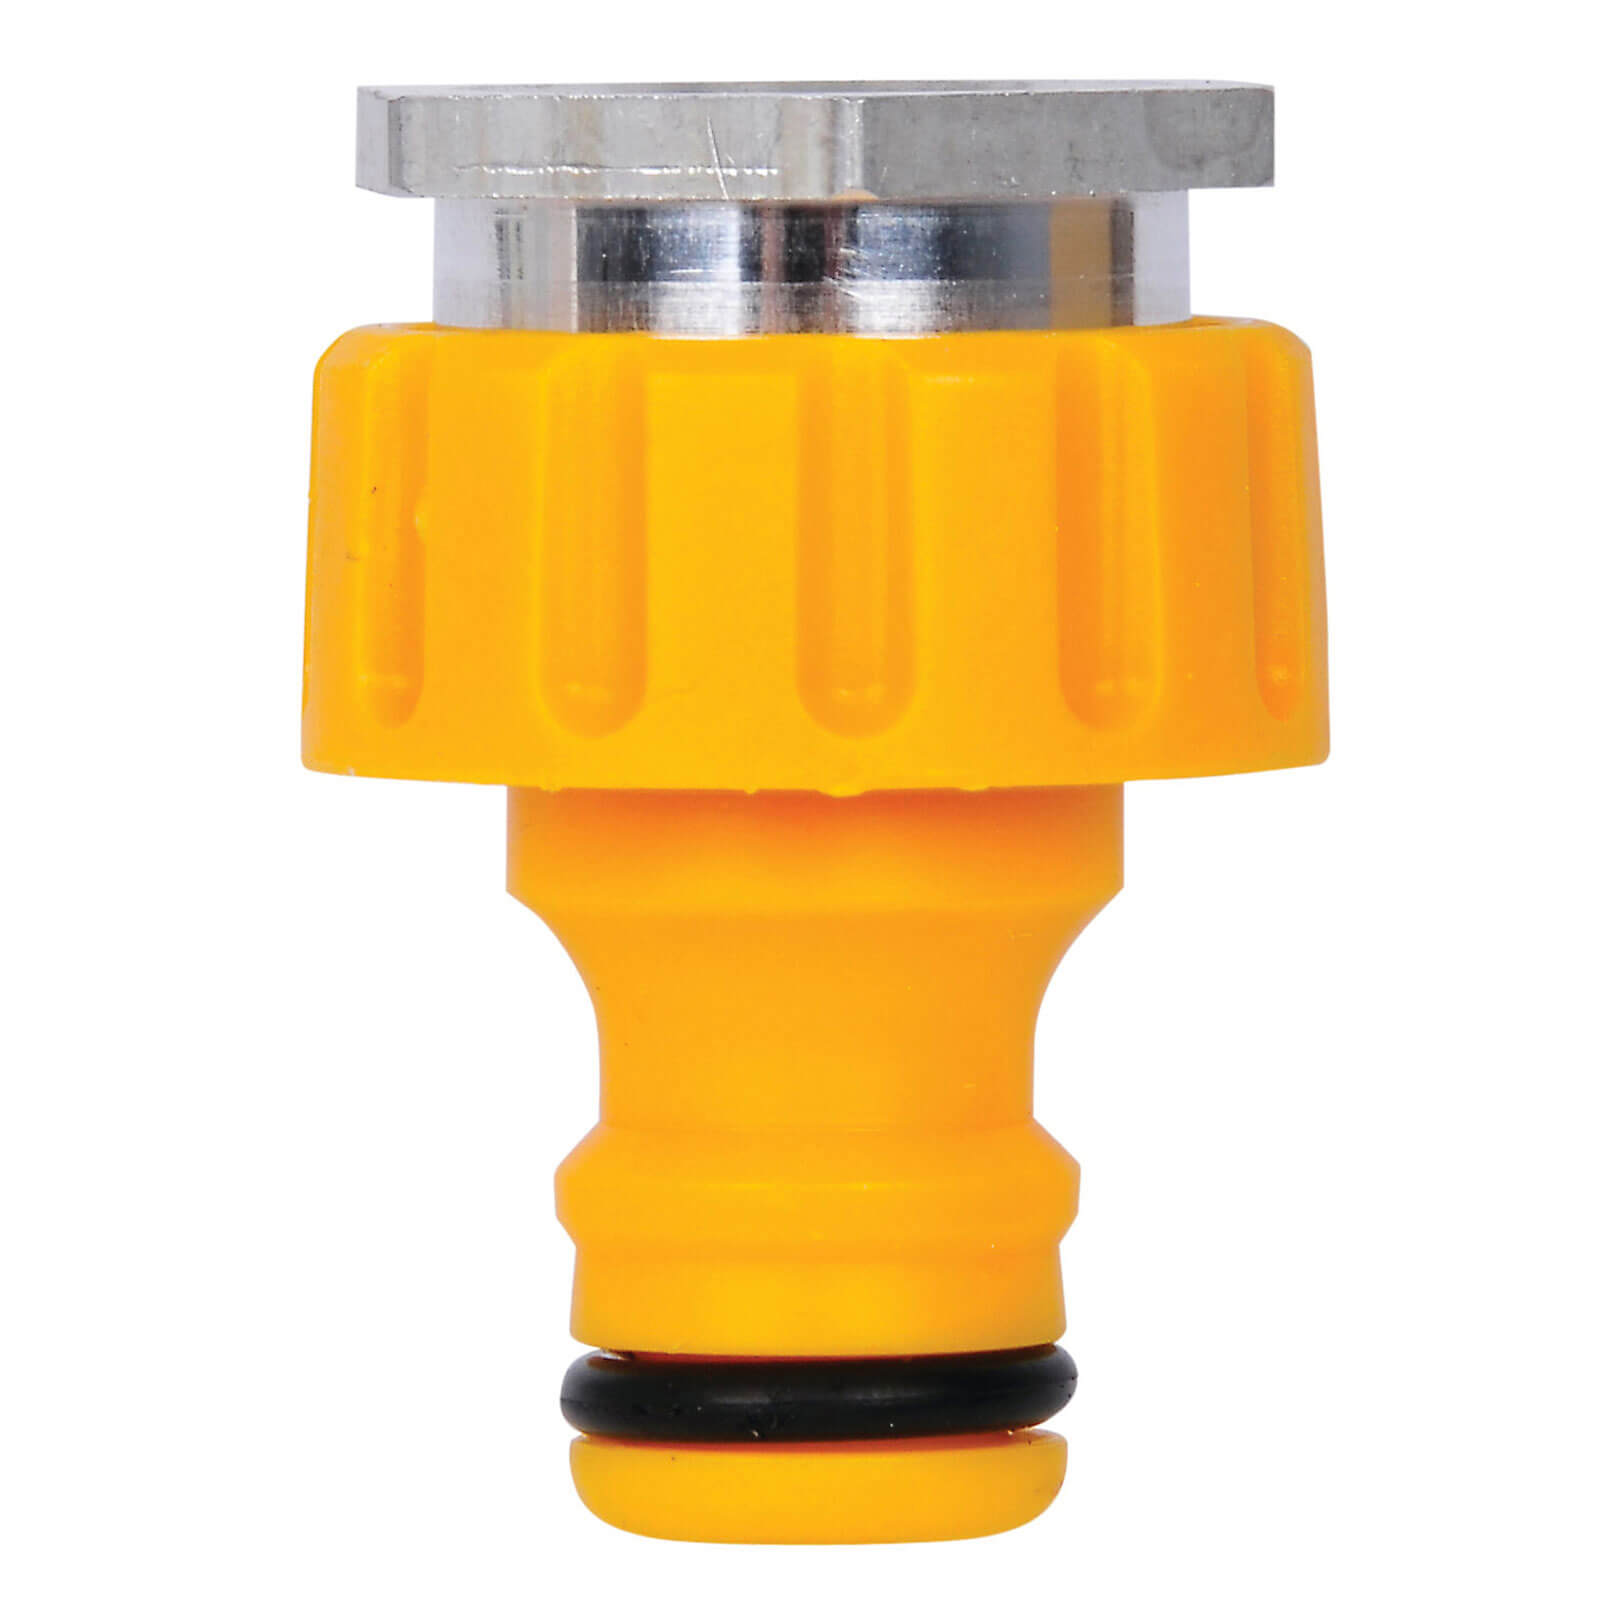 Image of Hozelock Aerator Head M22 Female Threaded Tap Hose Pipe Connector 22mm